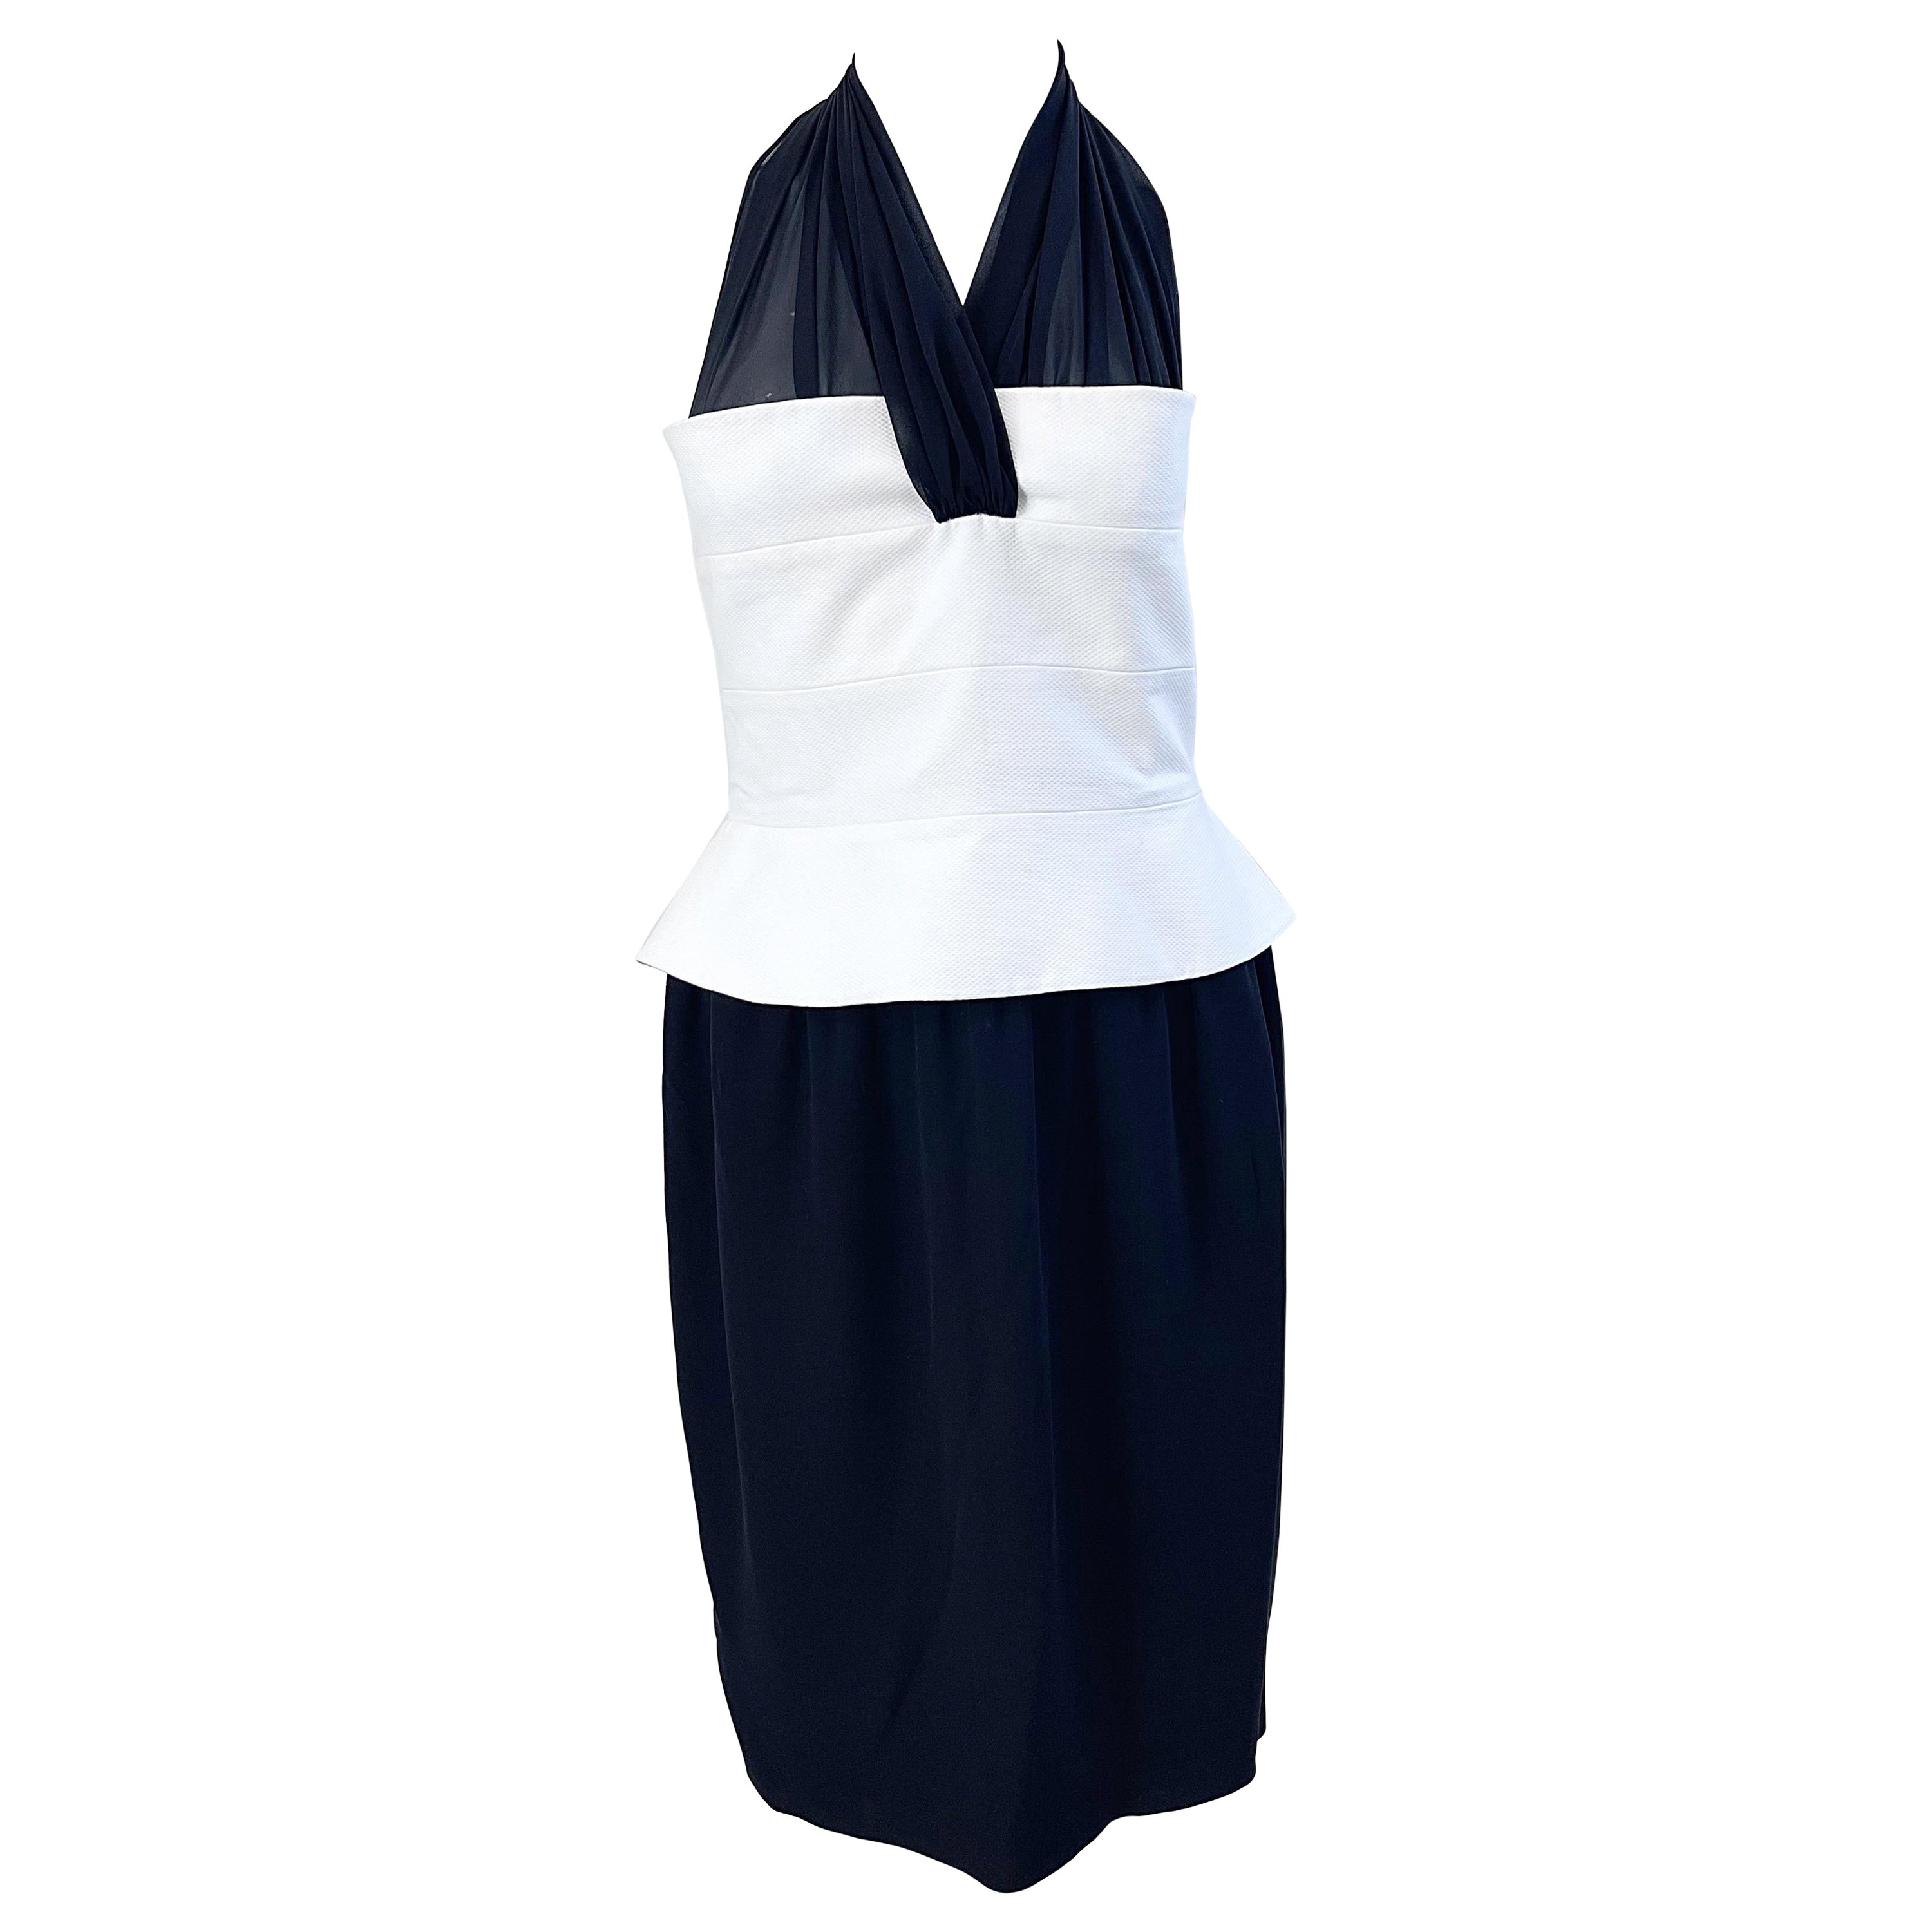 Karl Lagerfeld 1990s Size 42 / 8 Black and White Silk Chiffon Vintage 90s Dress For Sale